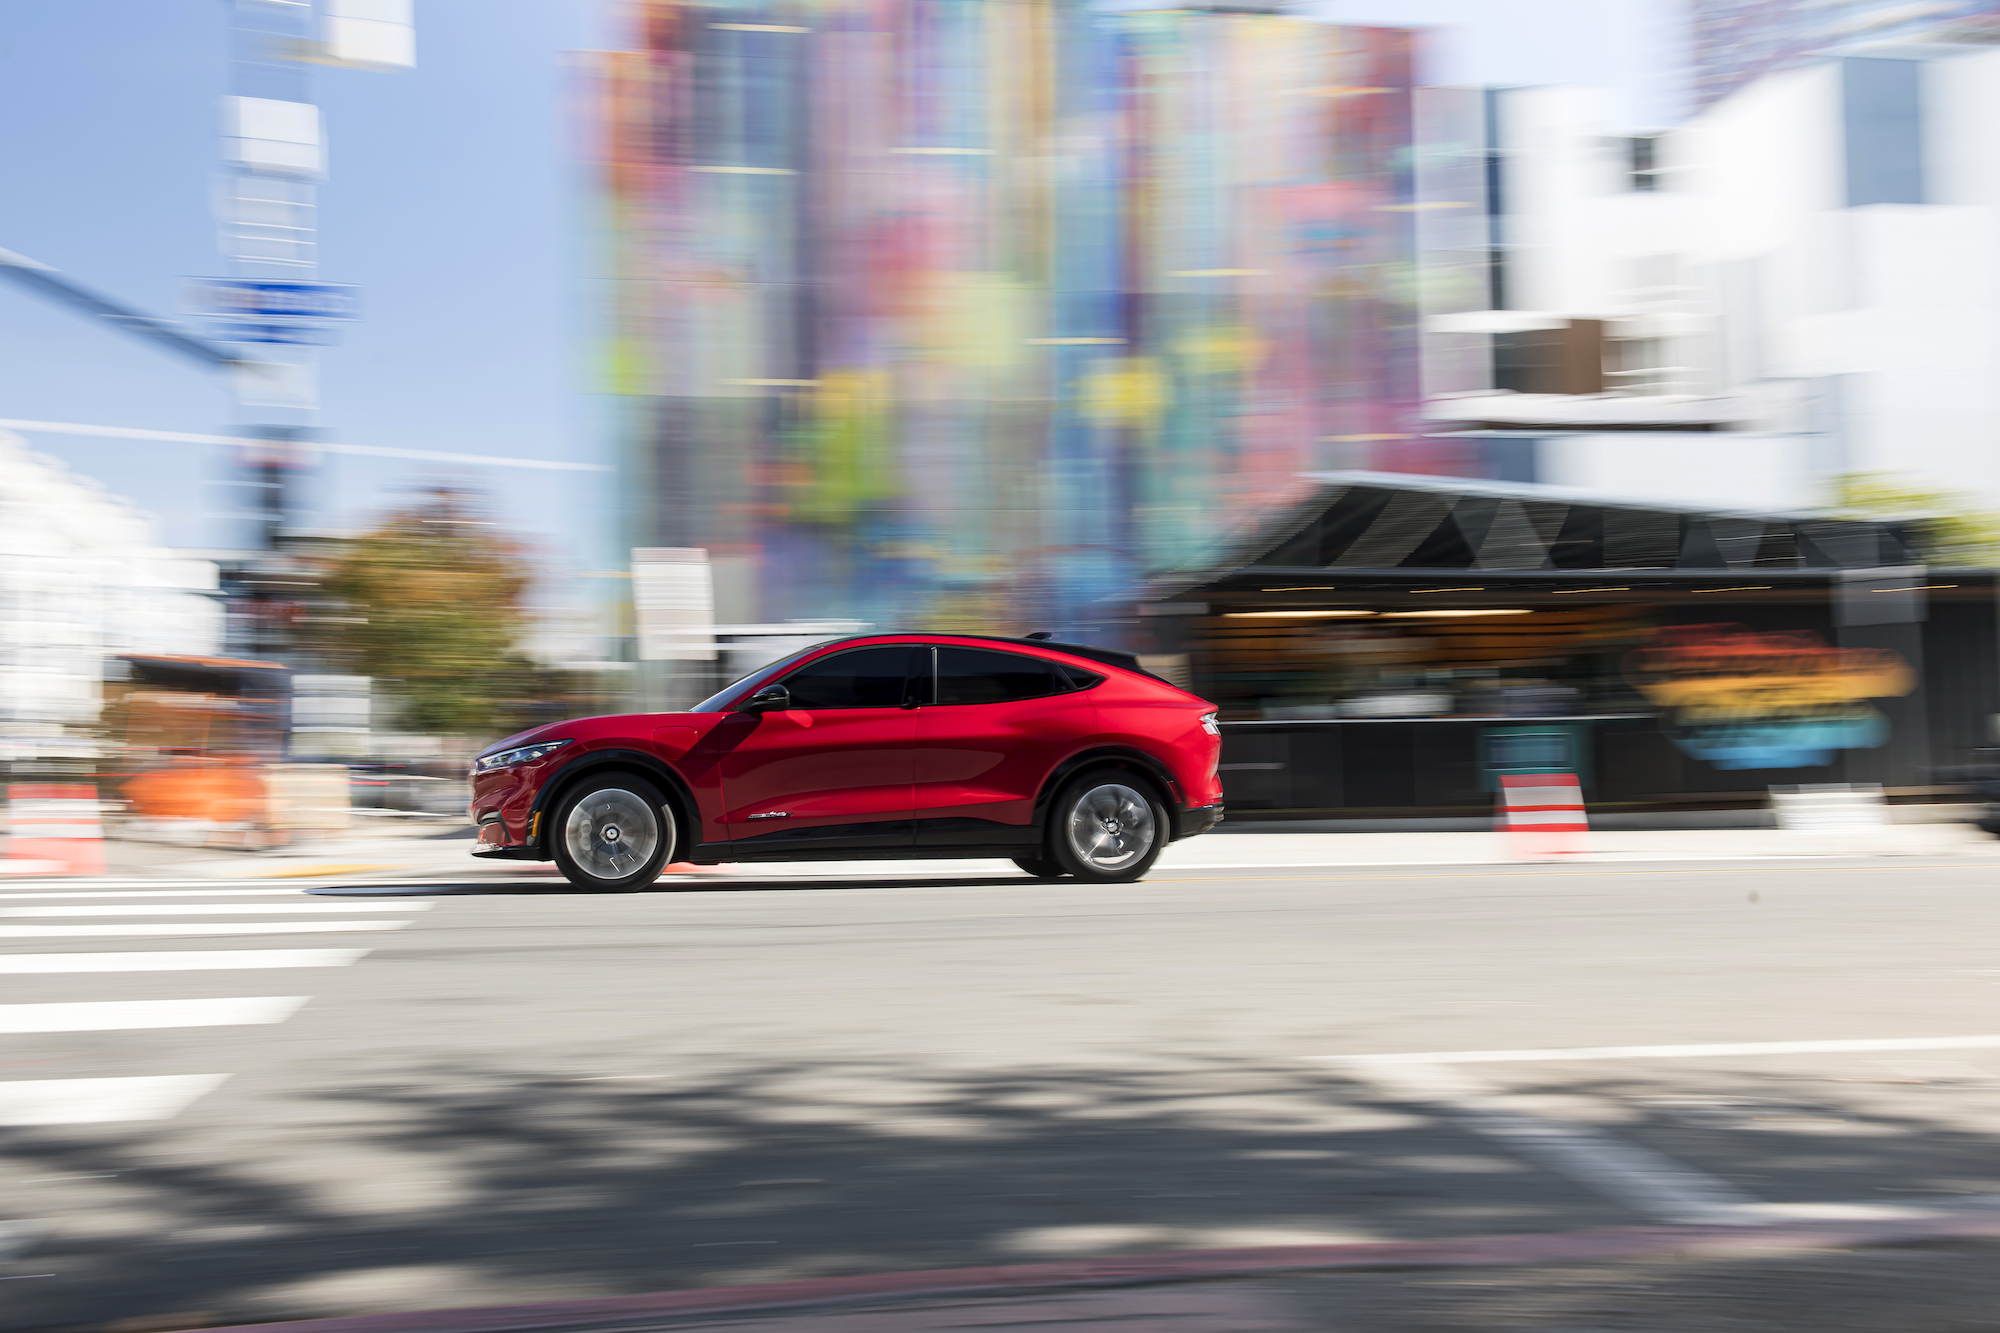 A red 2021 Ford Mustang Mach-E electric crossover SUV approaches a crosswalk at a city intersection on a sunny day